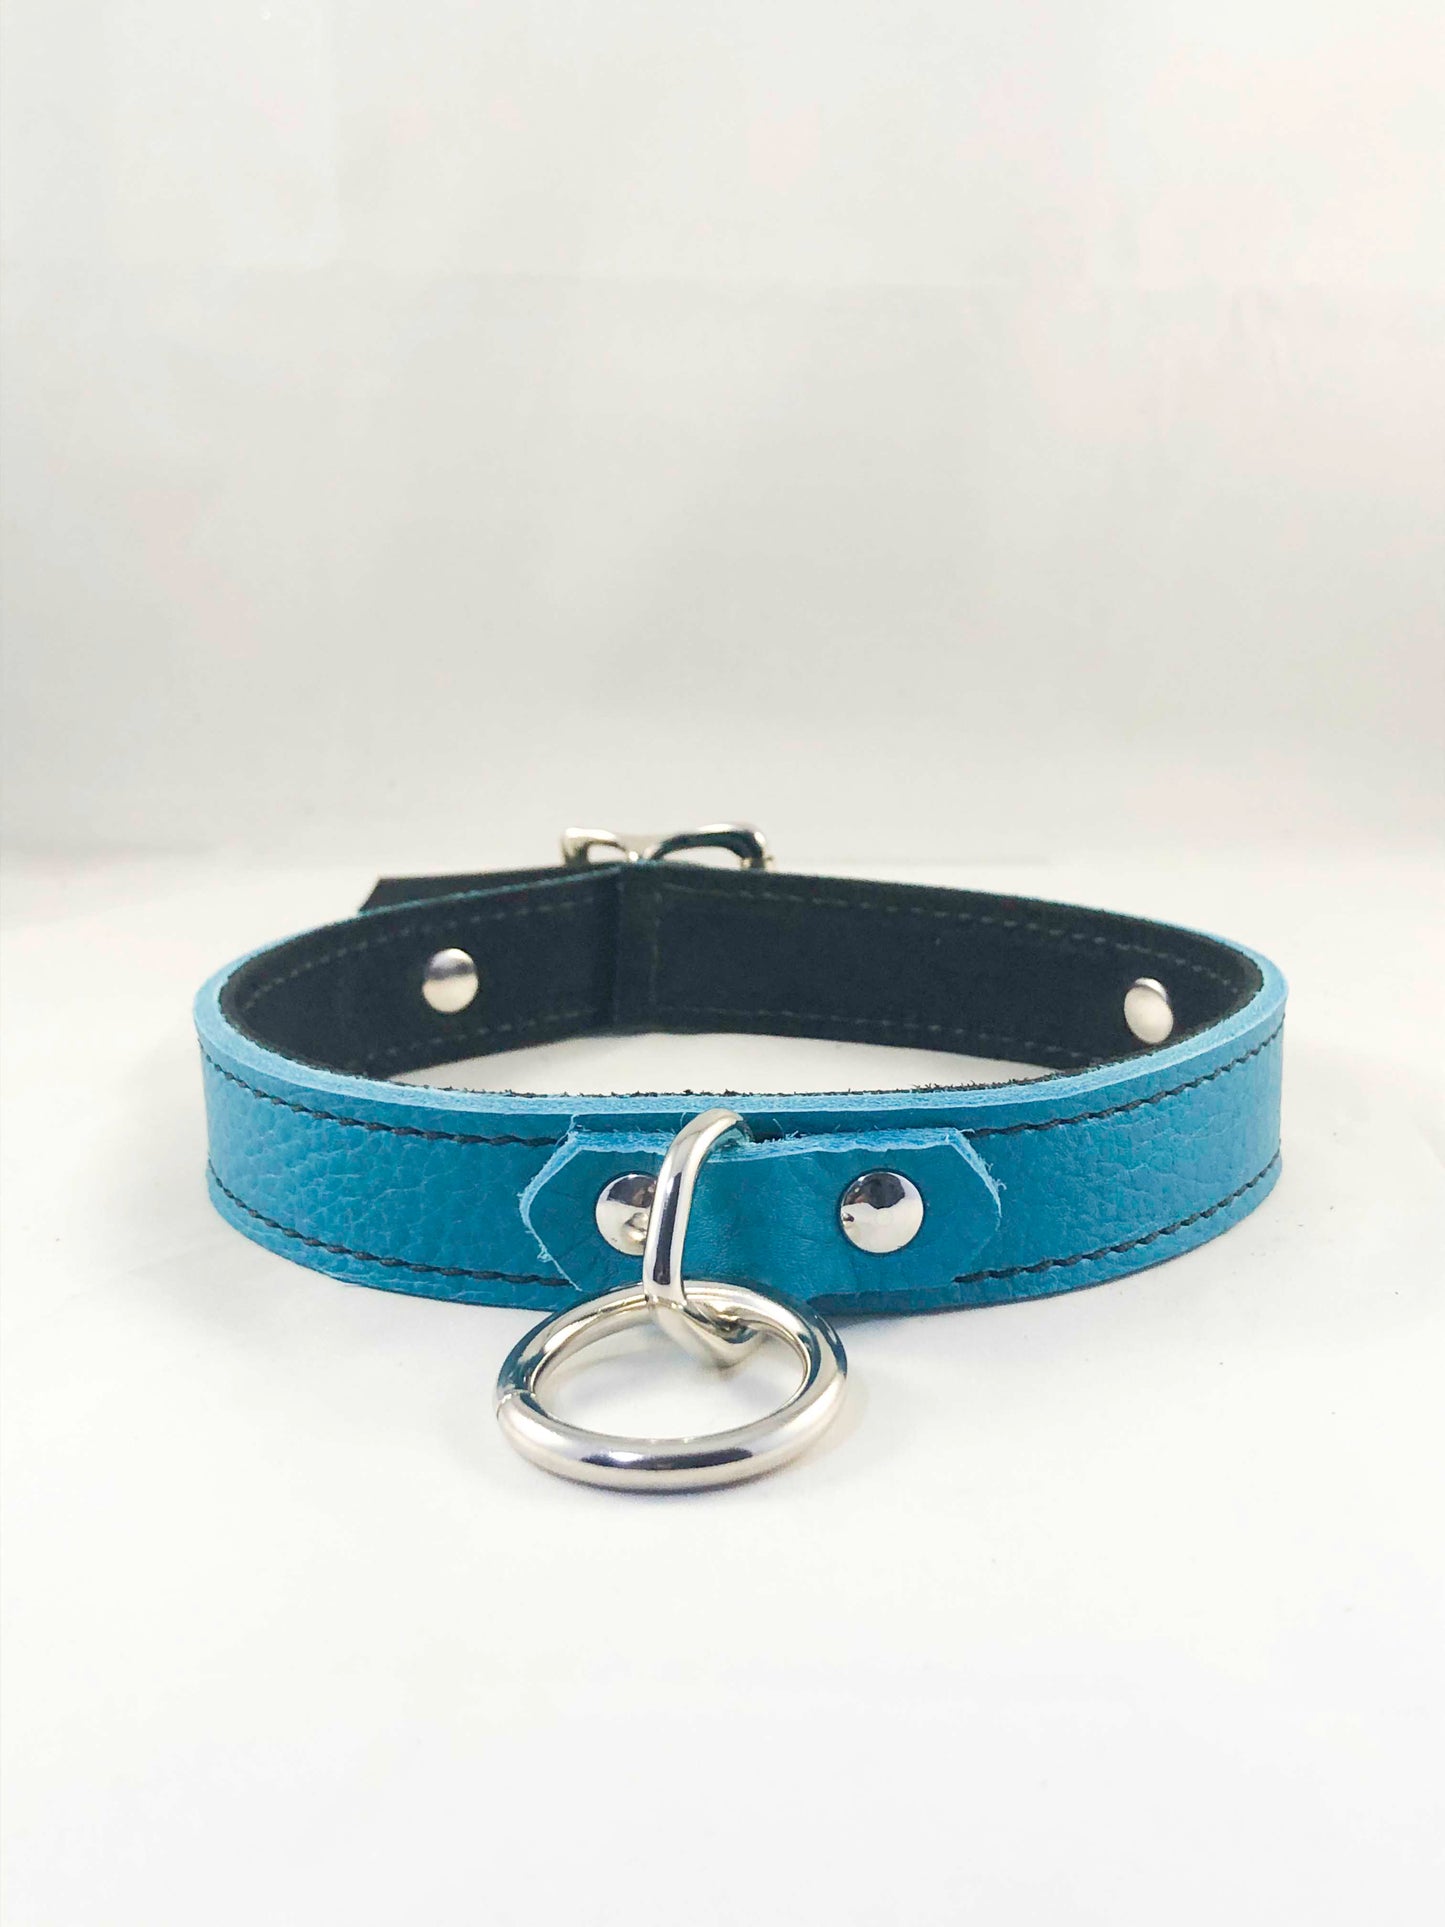 Front view of the teal Basic Single Ring Collar.